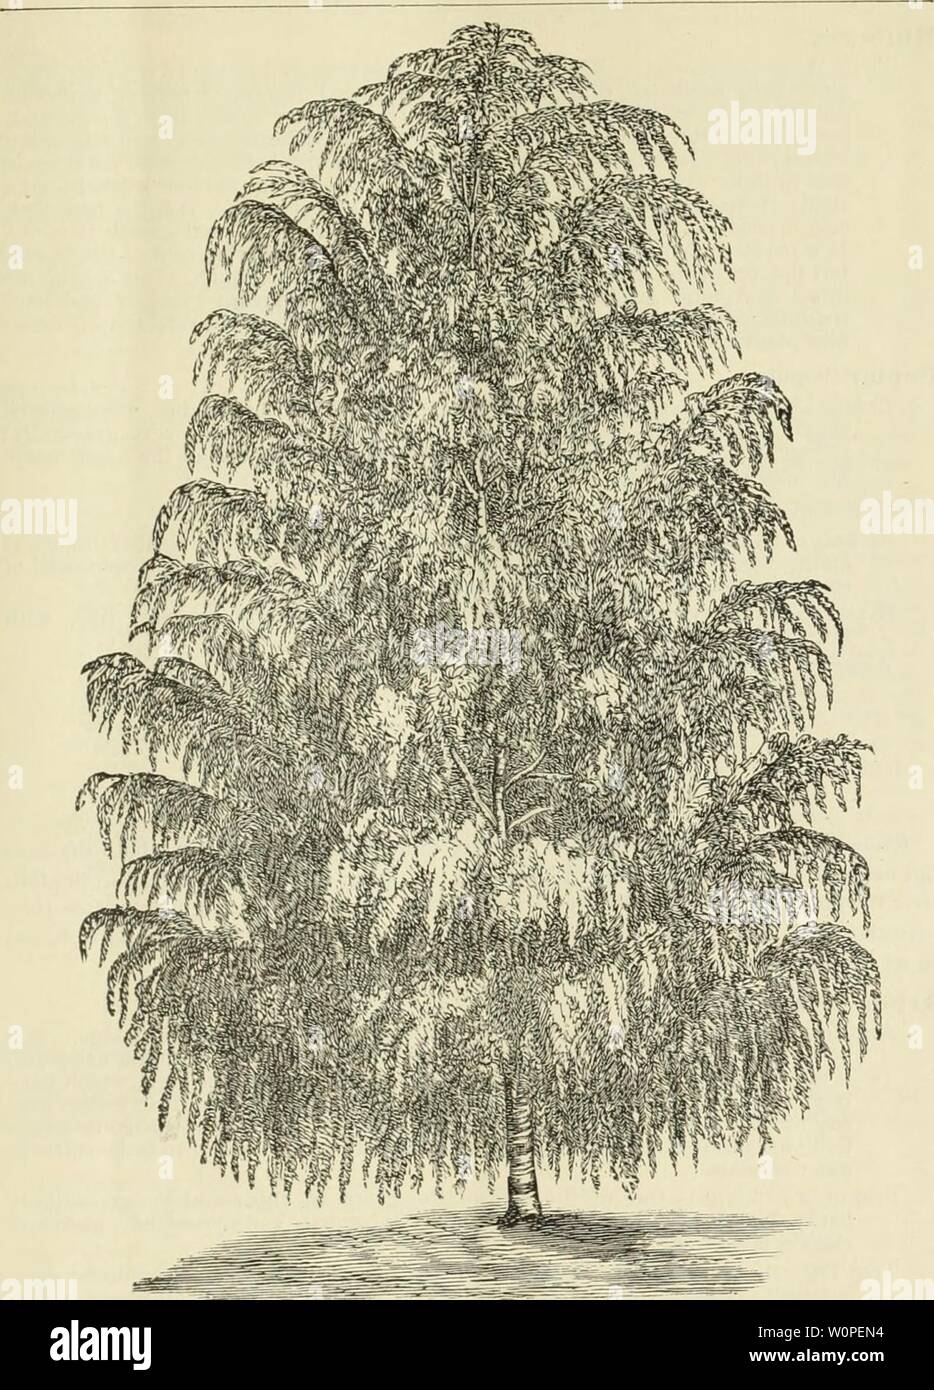 Archive image from page 52 of Descriptive catalogue of fruit and. Descriptive catalogue of fruit and ornamental trees grapes, roses, shrubs, etc., etc. descriptivecatal1890heho Year: 1890  WEEPING DECIDUOUS IREES. 49    BlliClI, CUT-LEAVED WEEPING. liinclen or Lime Tree (Tilia). White-Leaved Weeping (Alba Pendula)—A line tree with large leaves and droop- ing branches. Mountain Ash (Sorbus). . Weeping (Aucuparia Pendula&gt;—A beautiful tree, witli stragghng, weeping branches; makes a flue tree for the lawn; suitable for covering arbors. Stock Photo